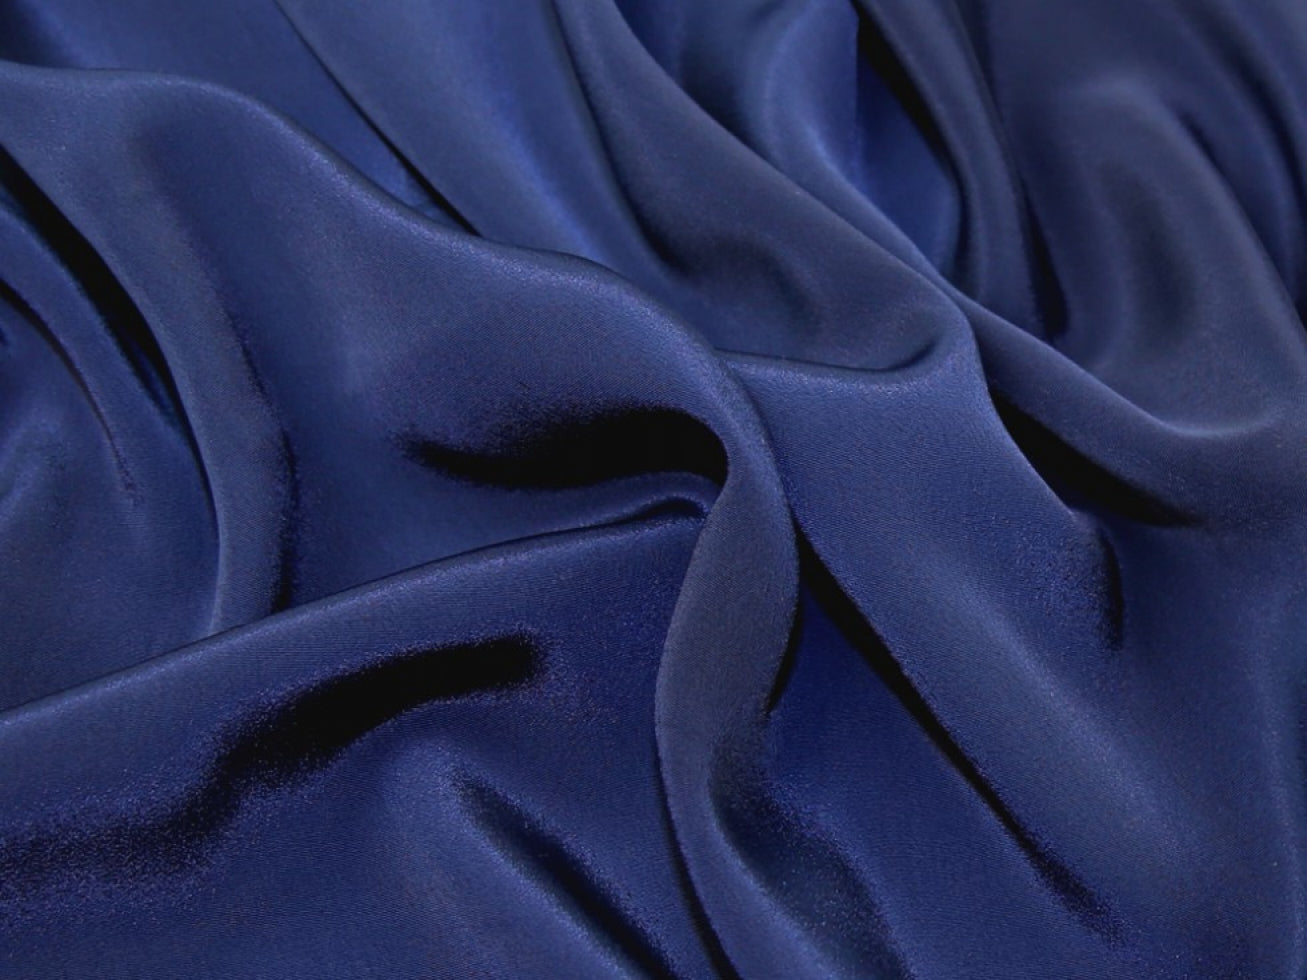 Darbari Smooth Light And Feel Like Feather On Skin Crepe De Chine Fabric- Navy Blue